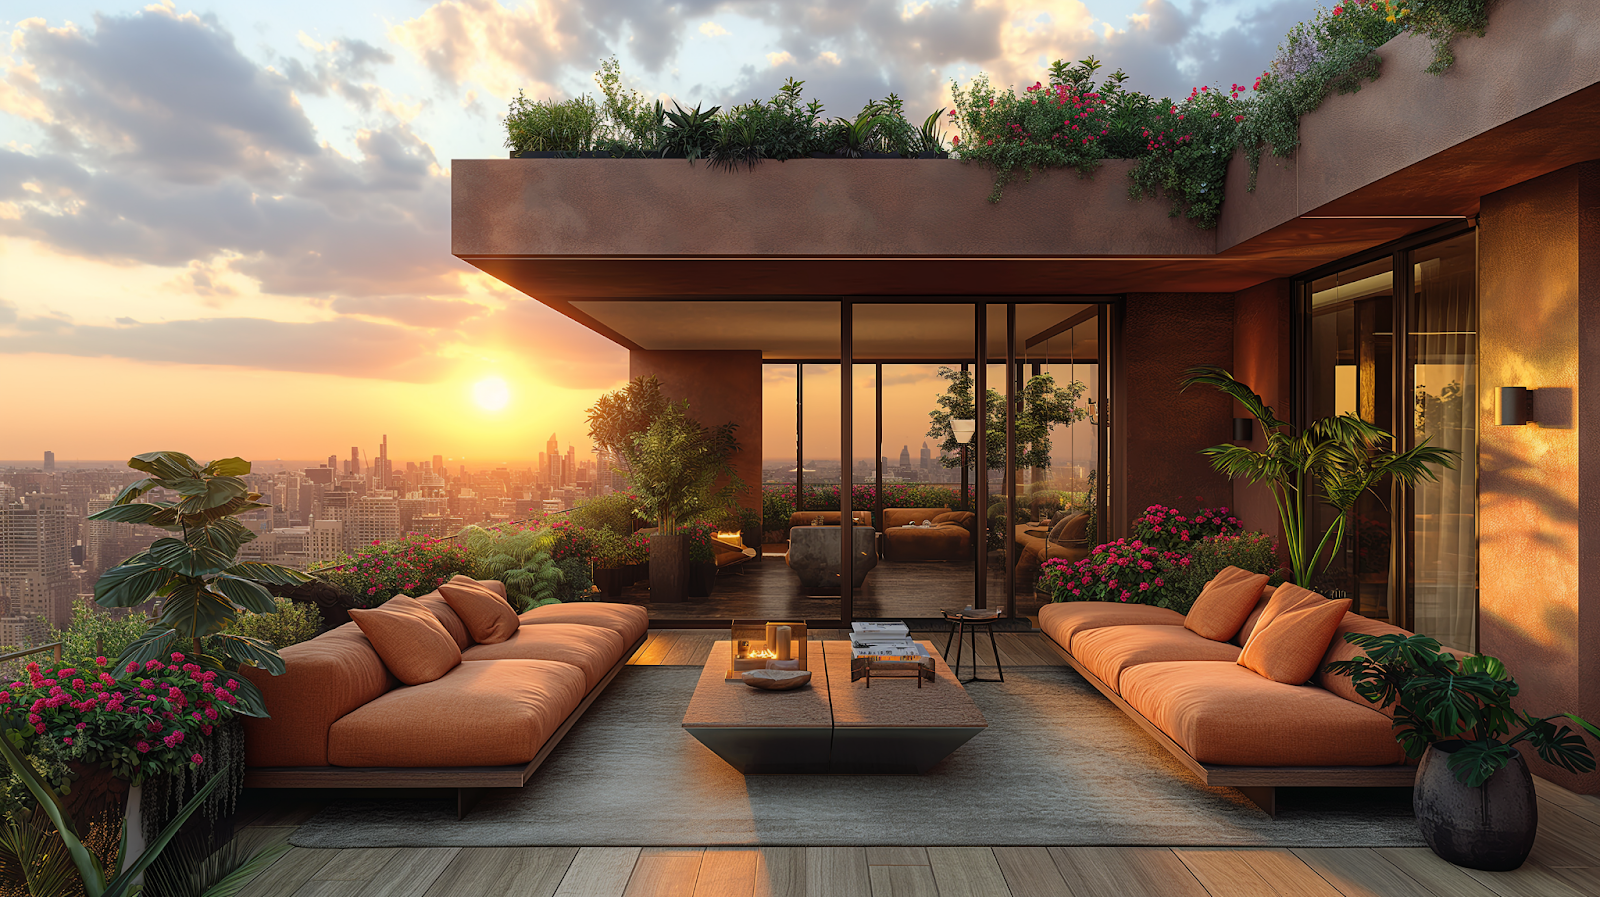 Rooftop terrace of a NYC boutique hotel at sunset, with panoramic skyline views and stylish outdoor seating